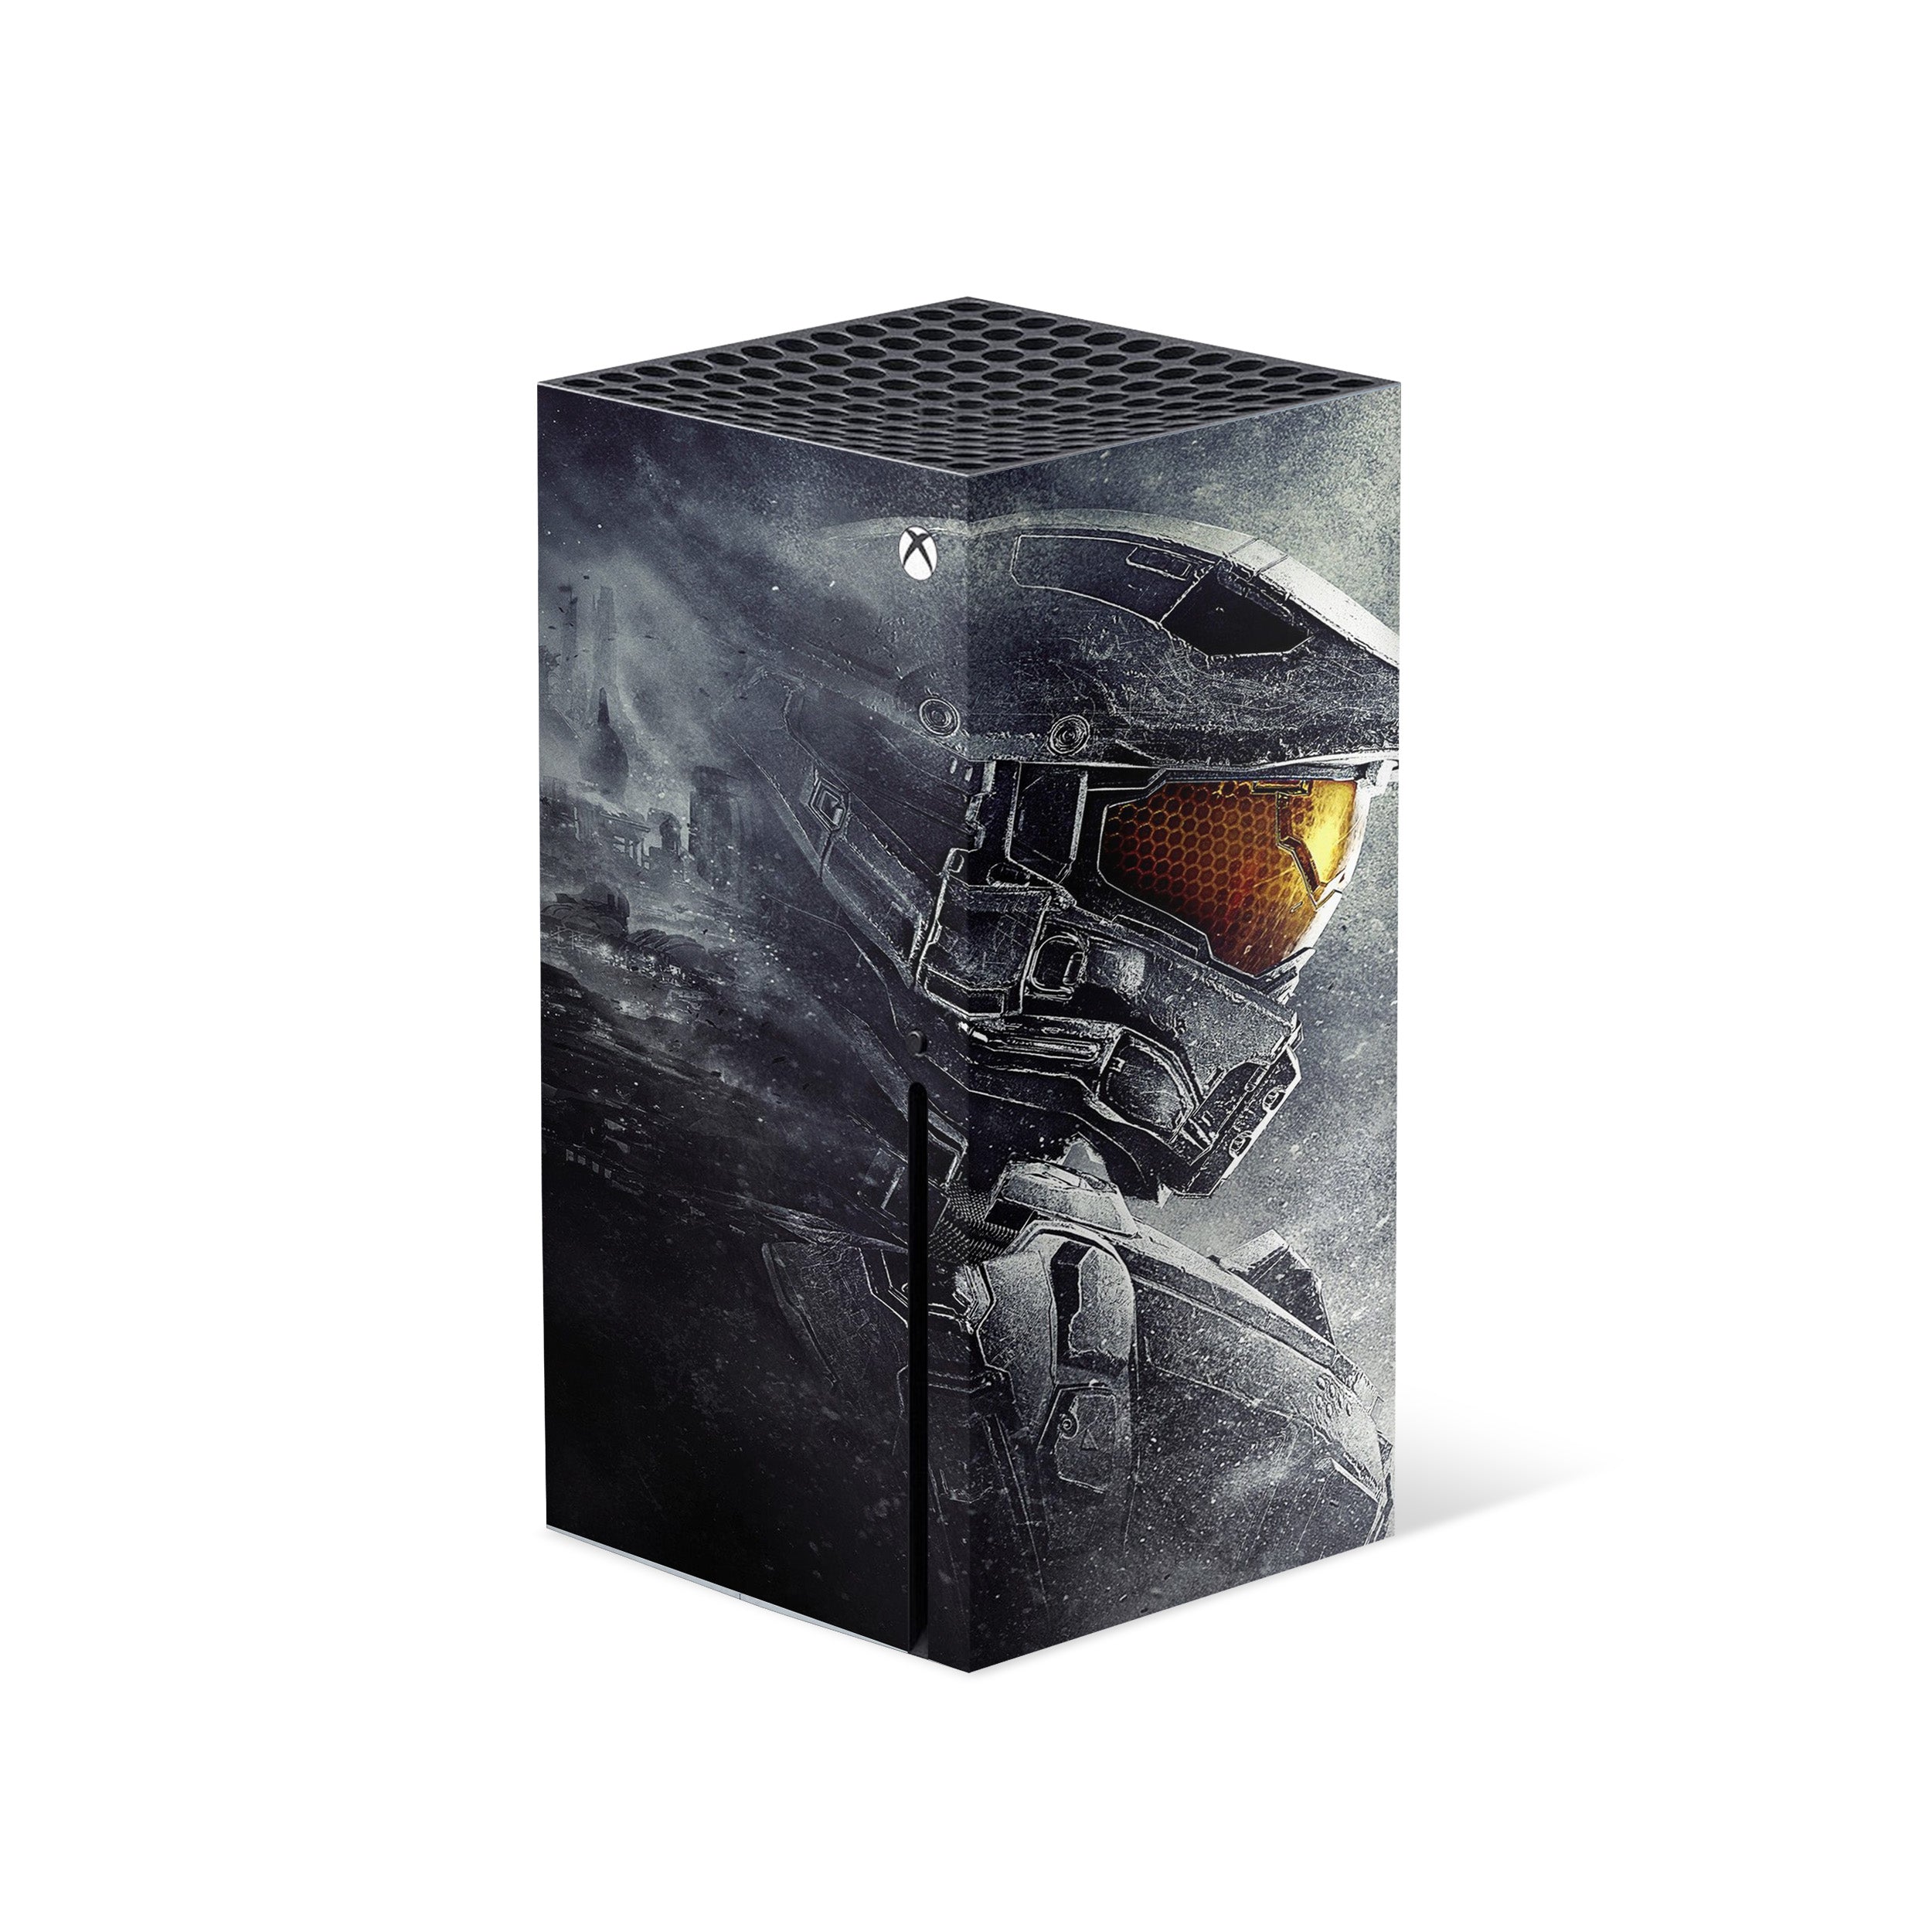 A video game skin featuring a Halo design for the Xbox Series X.